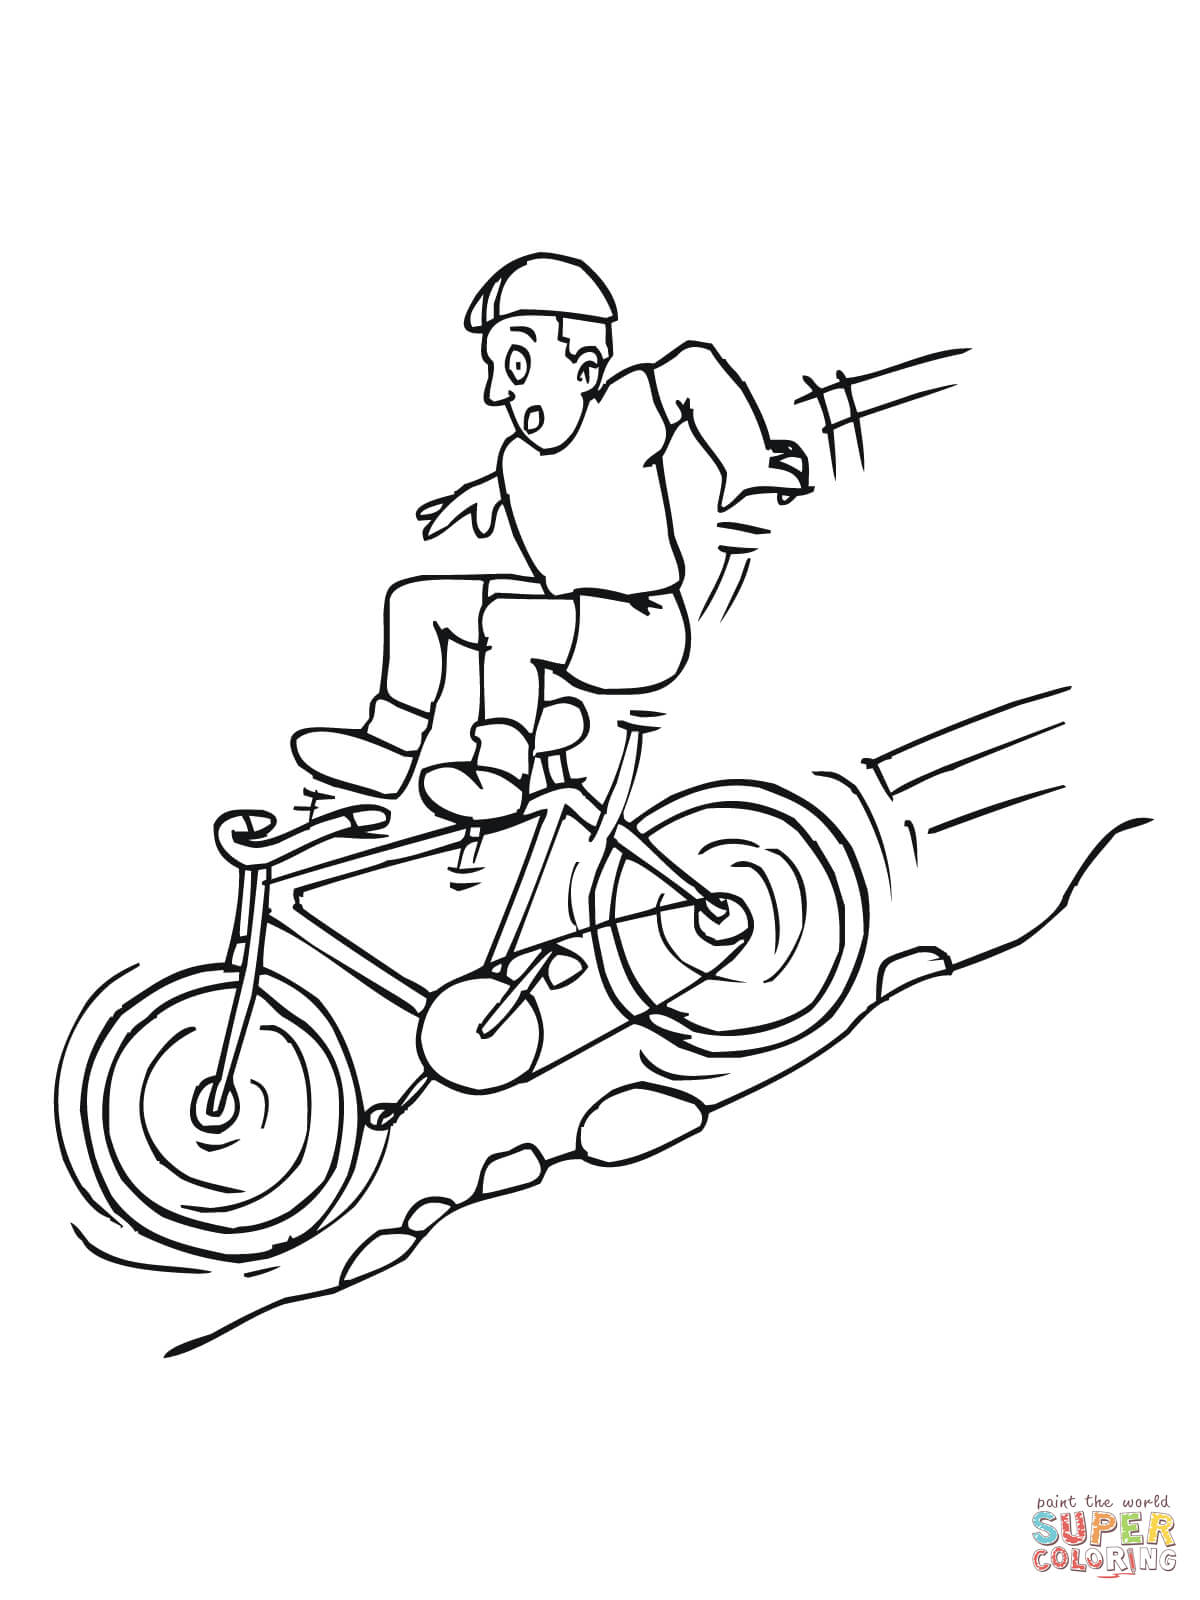 Downhill on Mountain Bike coloring page | Free Printable Coloring ...